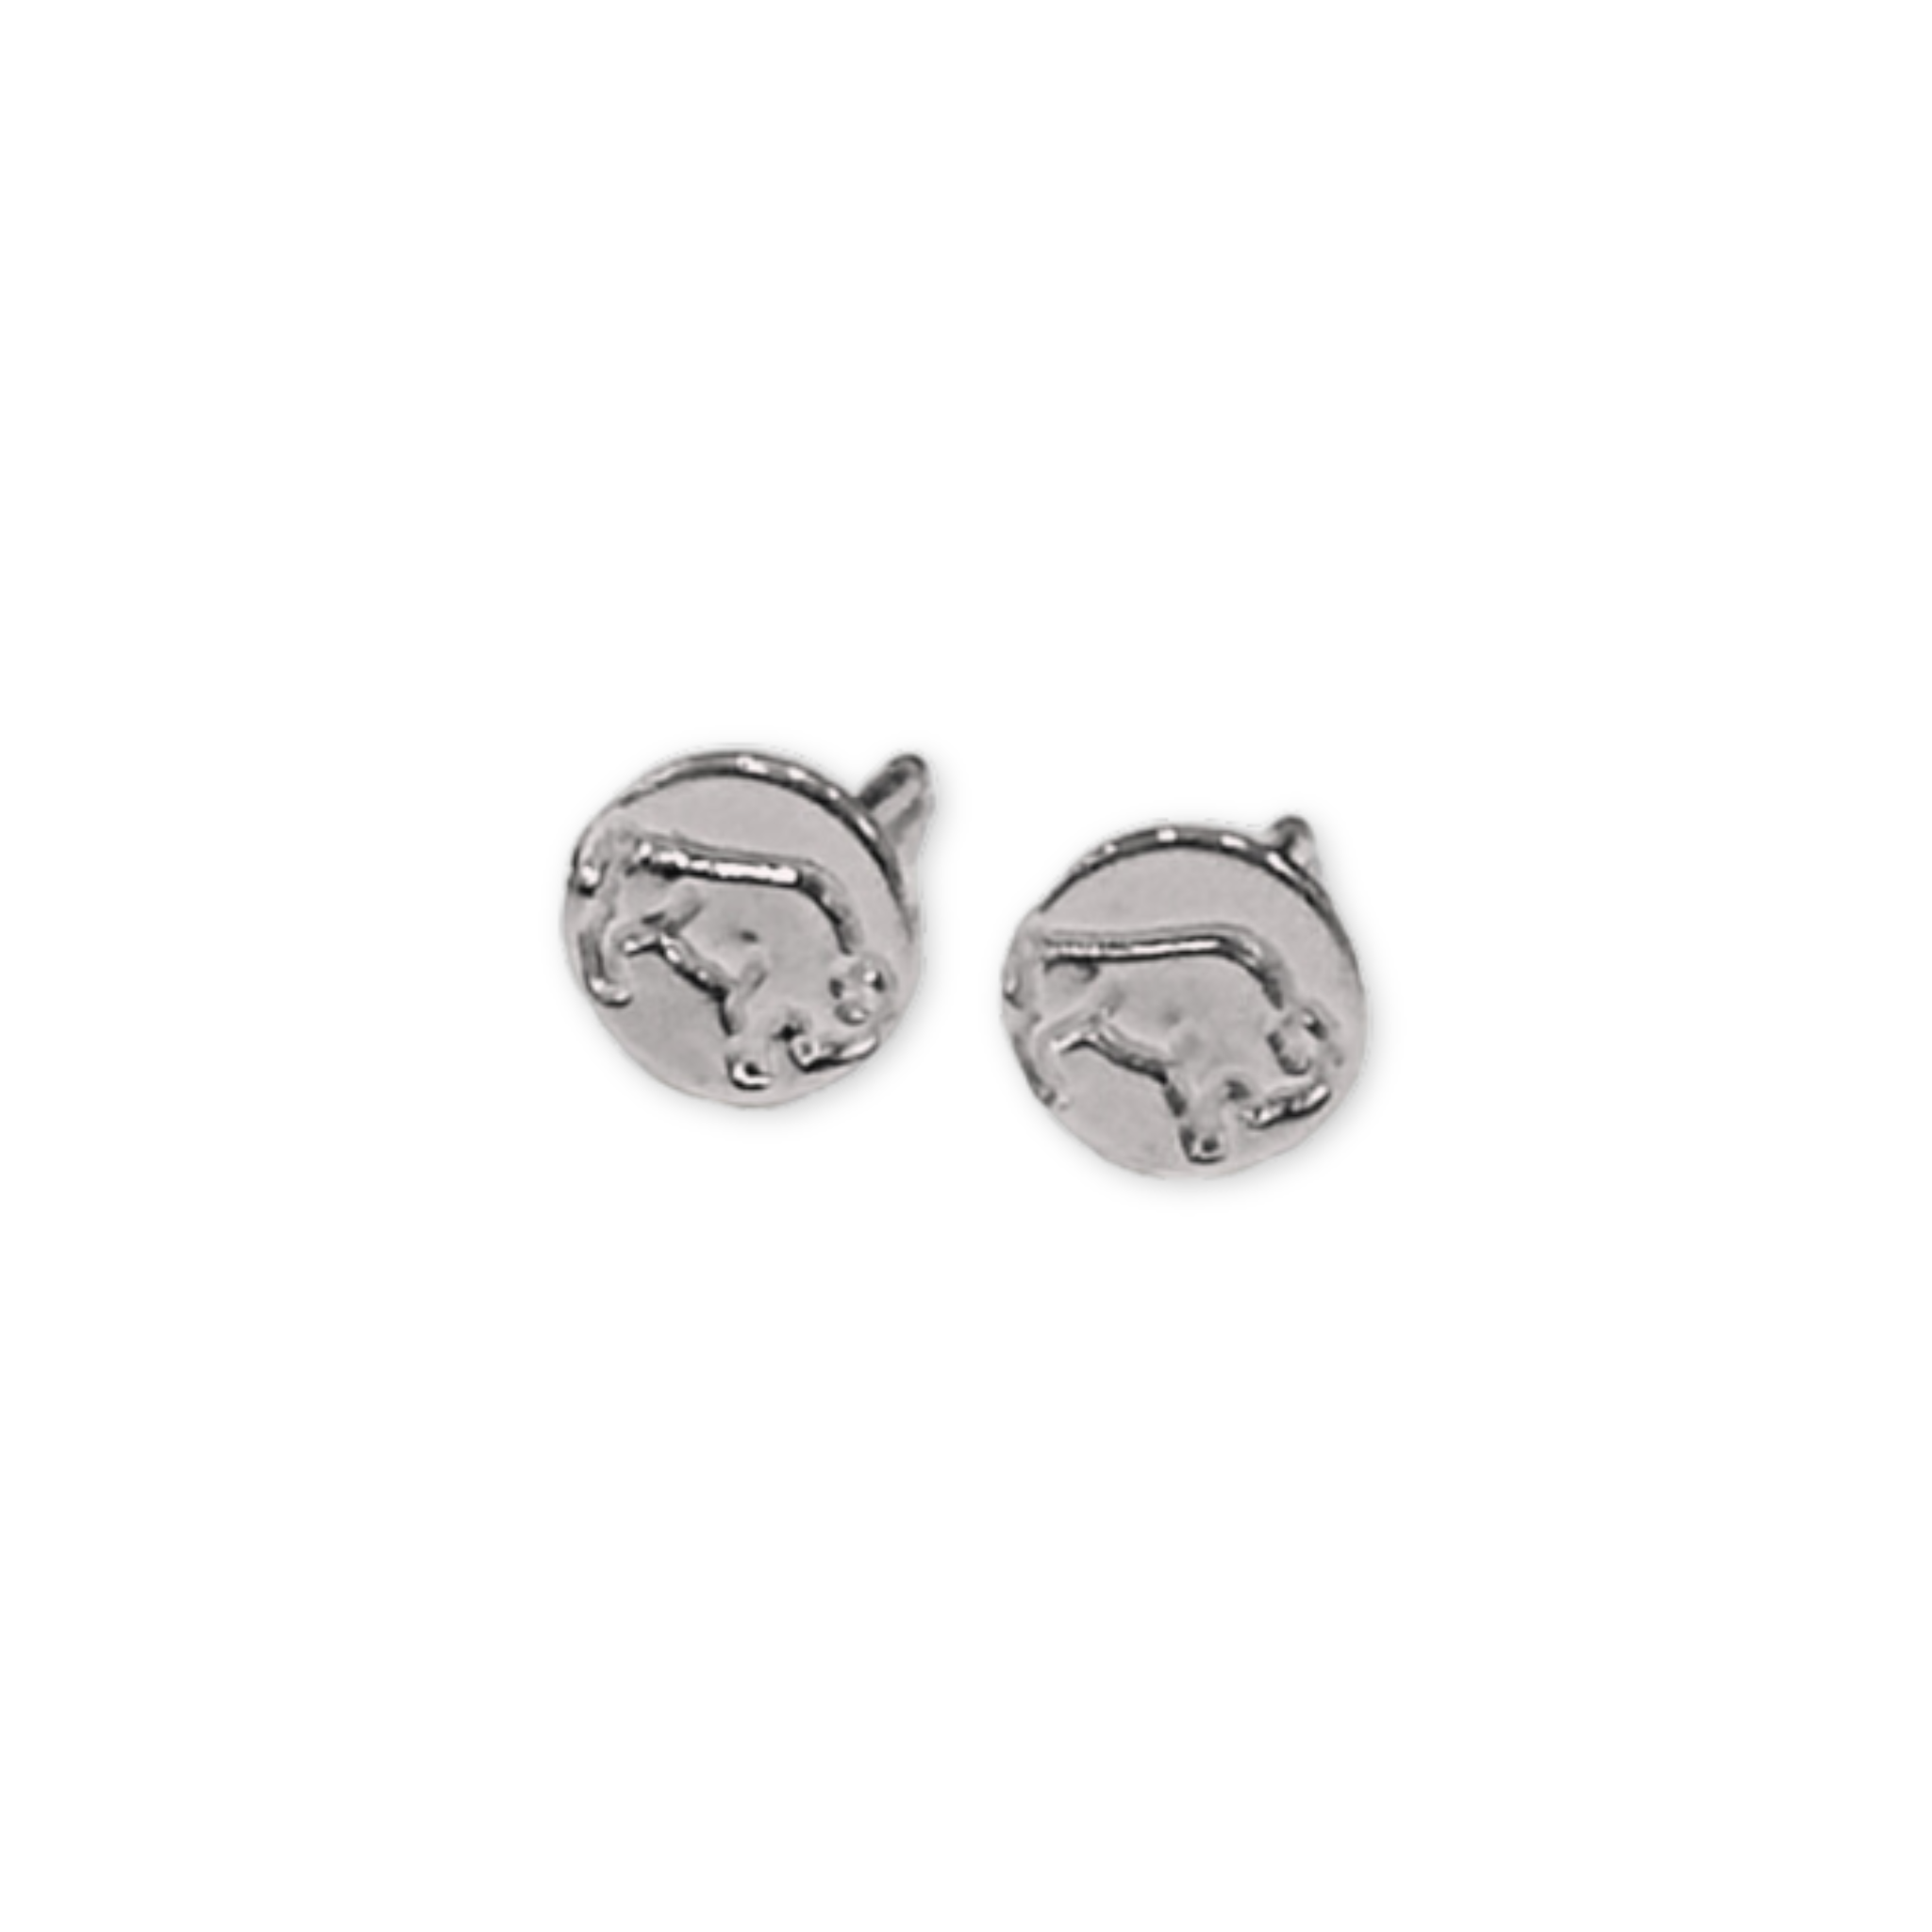 a pair of silver studs with bison on them